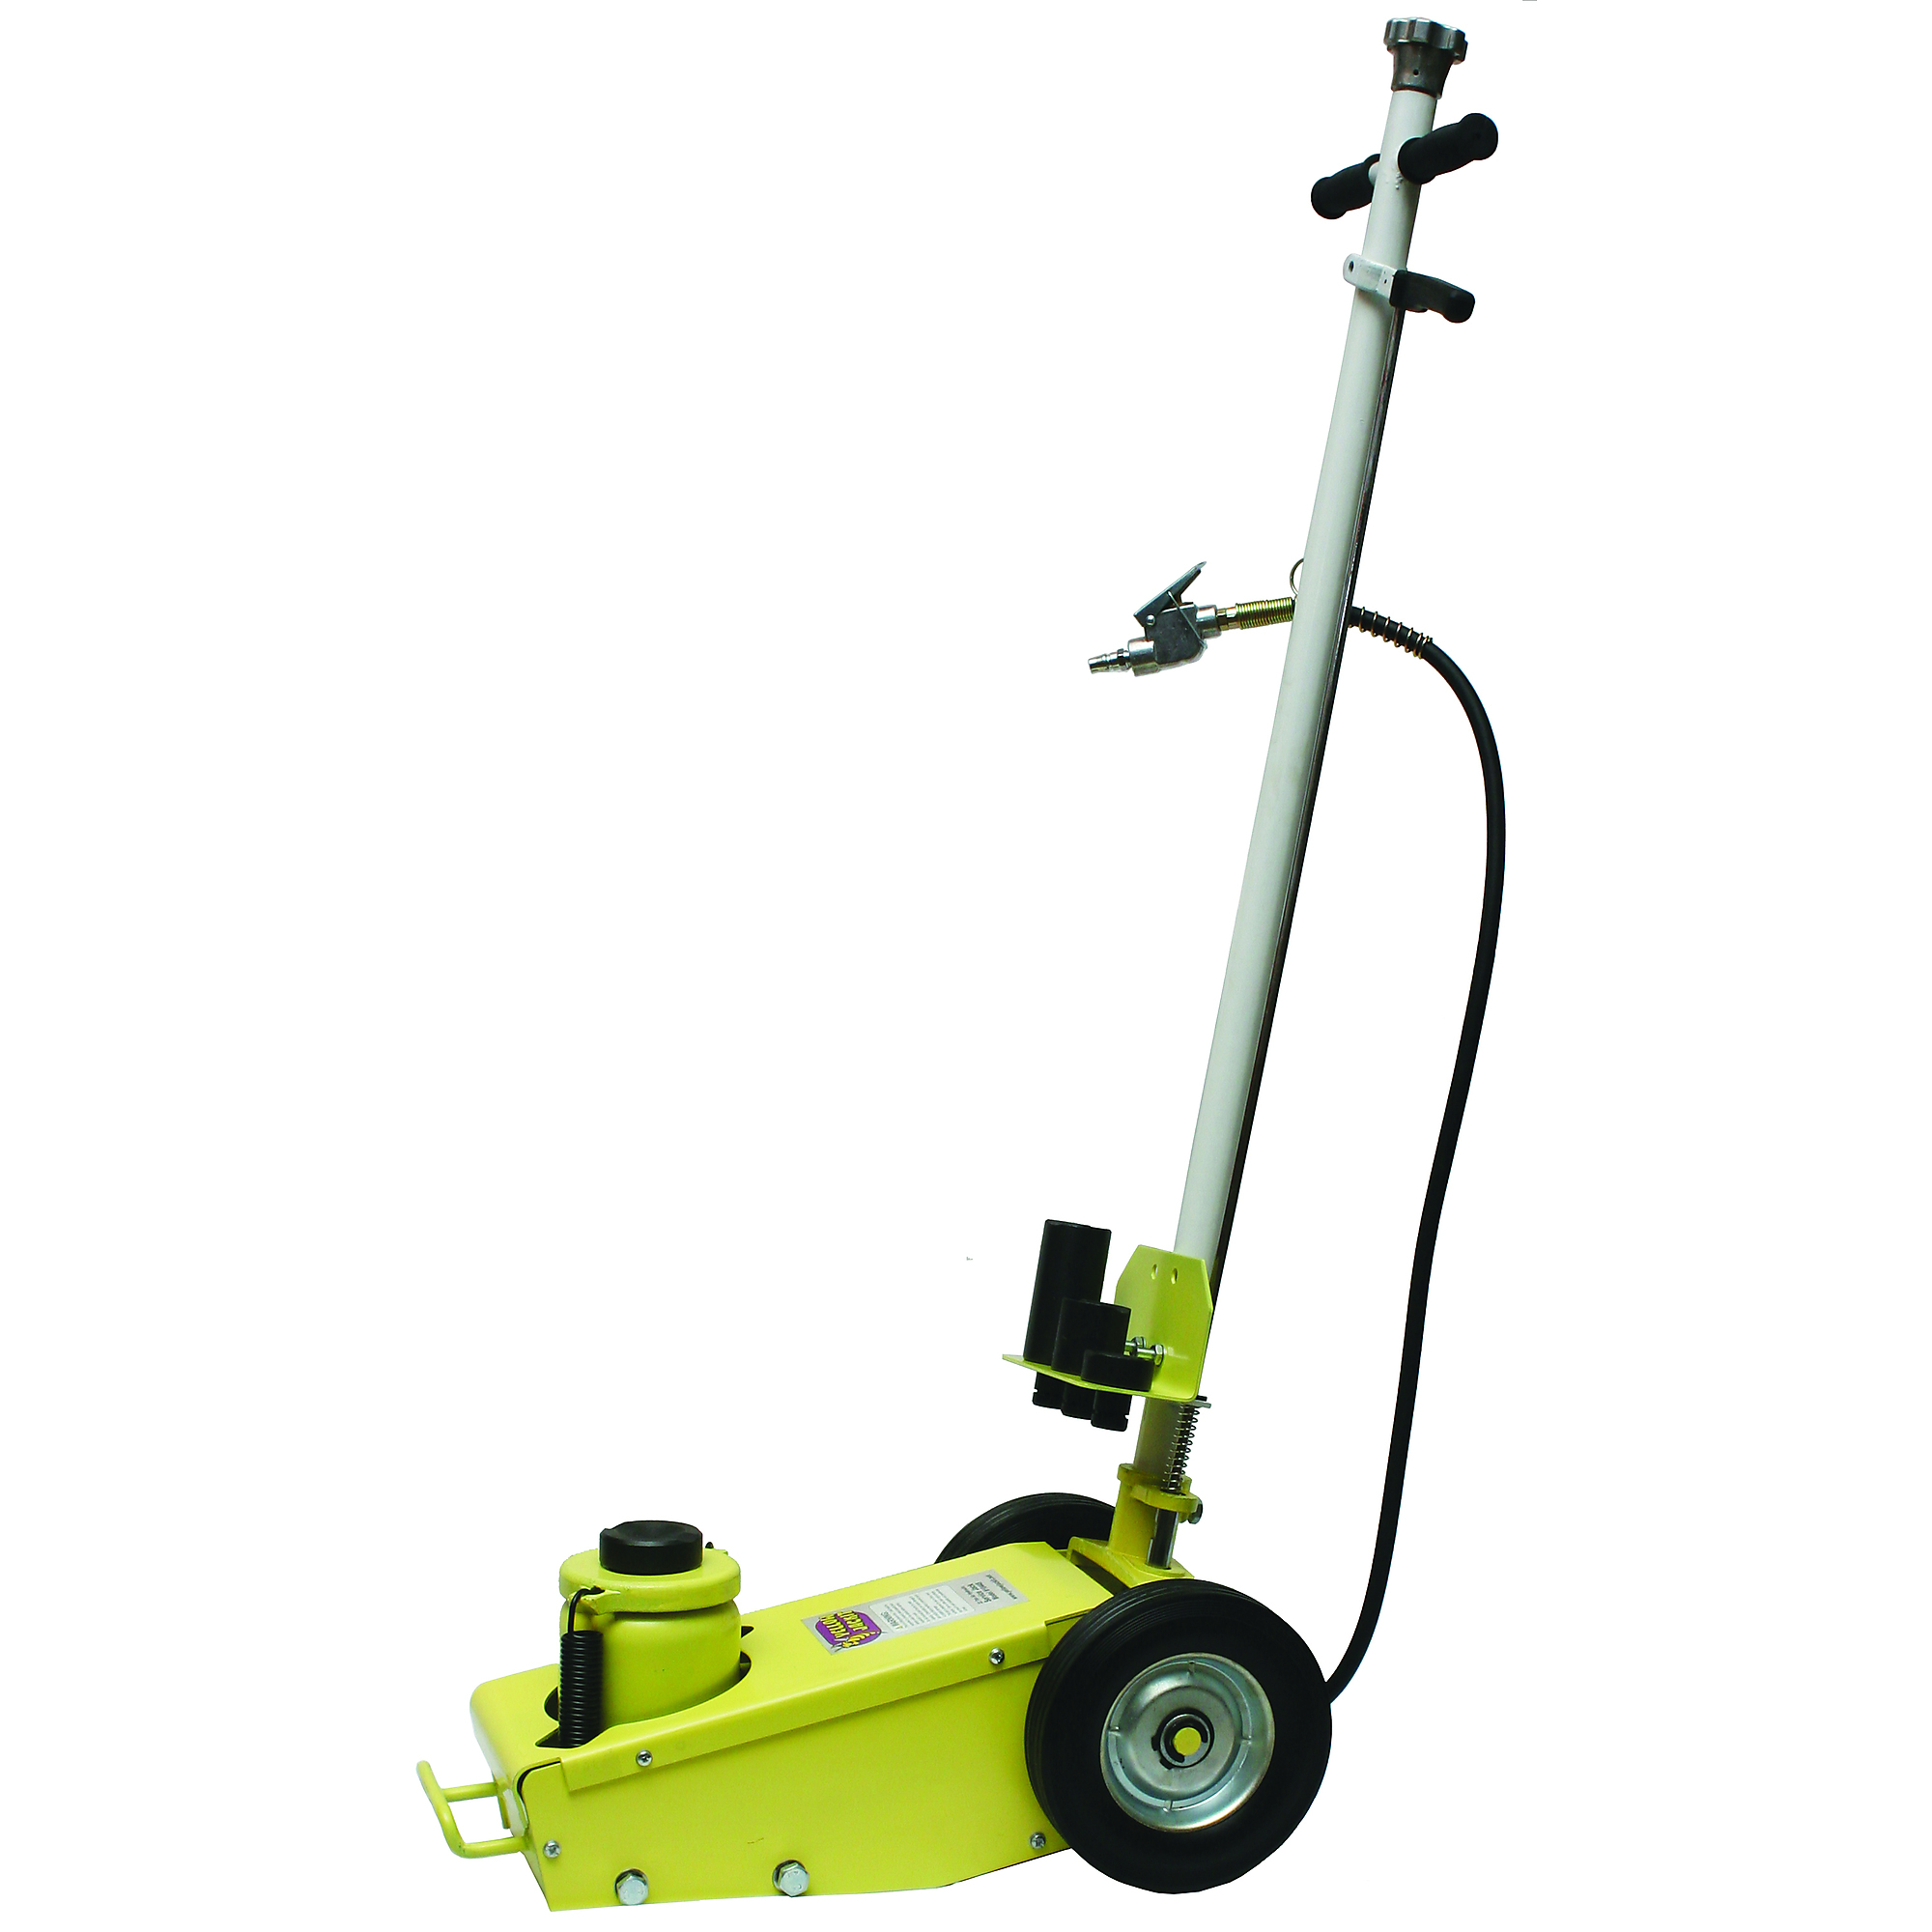 ESCO Yellow Jackit, Yellow Jackit service Jack, Lift Capacity 22 Tons, Max. Lift Height 20.75 in, Power Source Air/Hydraulic, Model 10448